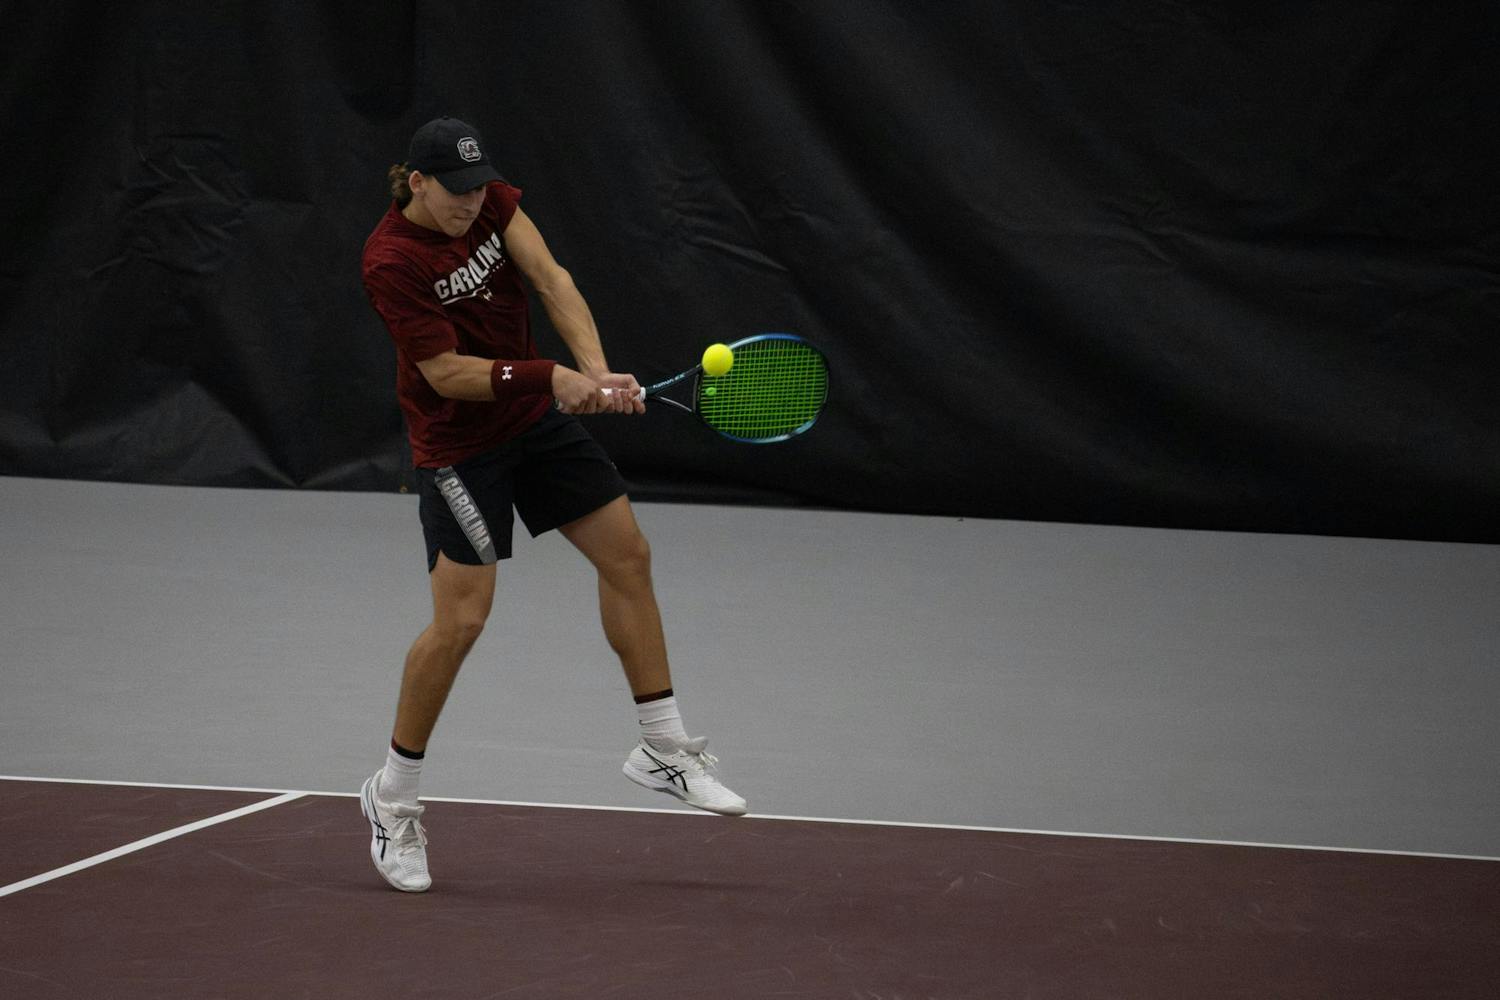 Junior Casey Hoole backhands the ball during South Carolina’s match against Clemson at the Carolina Indoor Tennis Center on Jan. 27, 2024. The Gamecocks beat the Tigers 4-2 in the rivalry matchup.